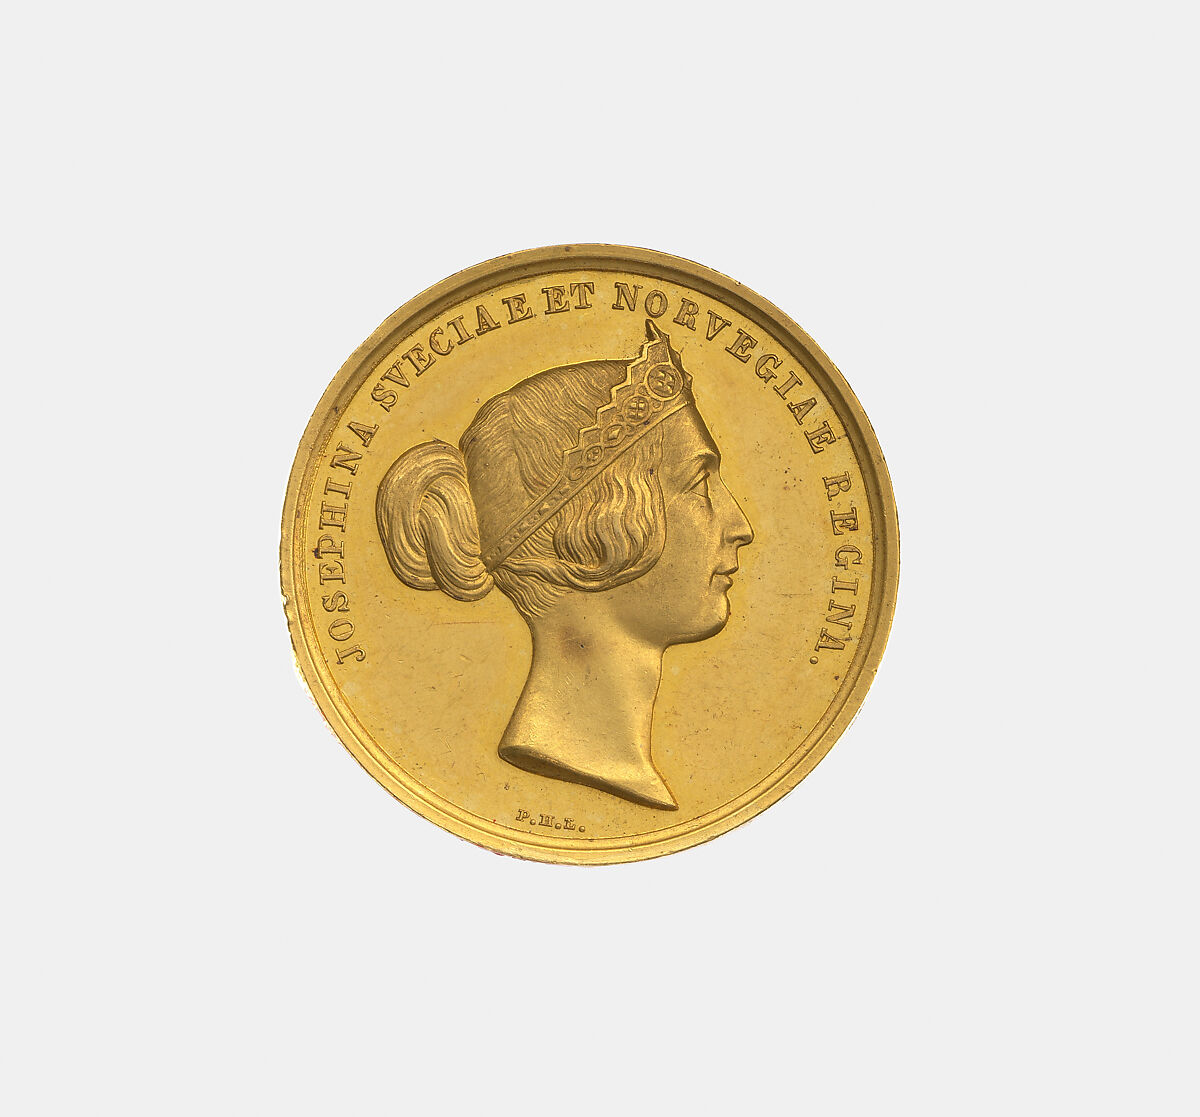 Josephine, Queen of Sweden and Norway as wife of Oscar I (r. 1844–1859), Ludwig Peterssen Lundgren (Swedish, died 1854), Gold, Swedish 